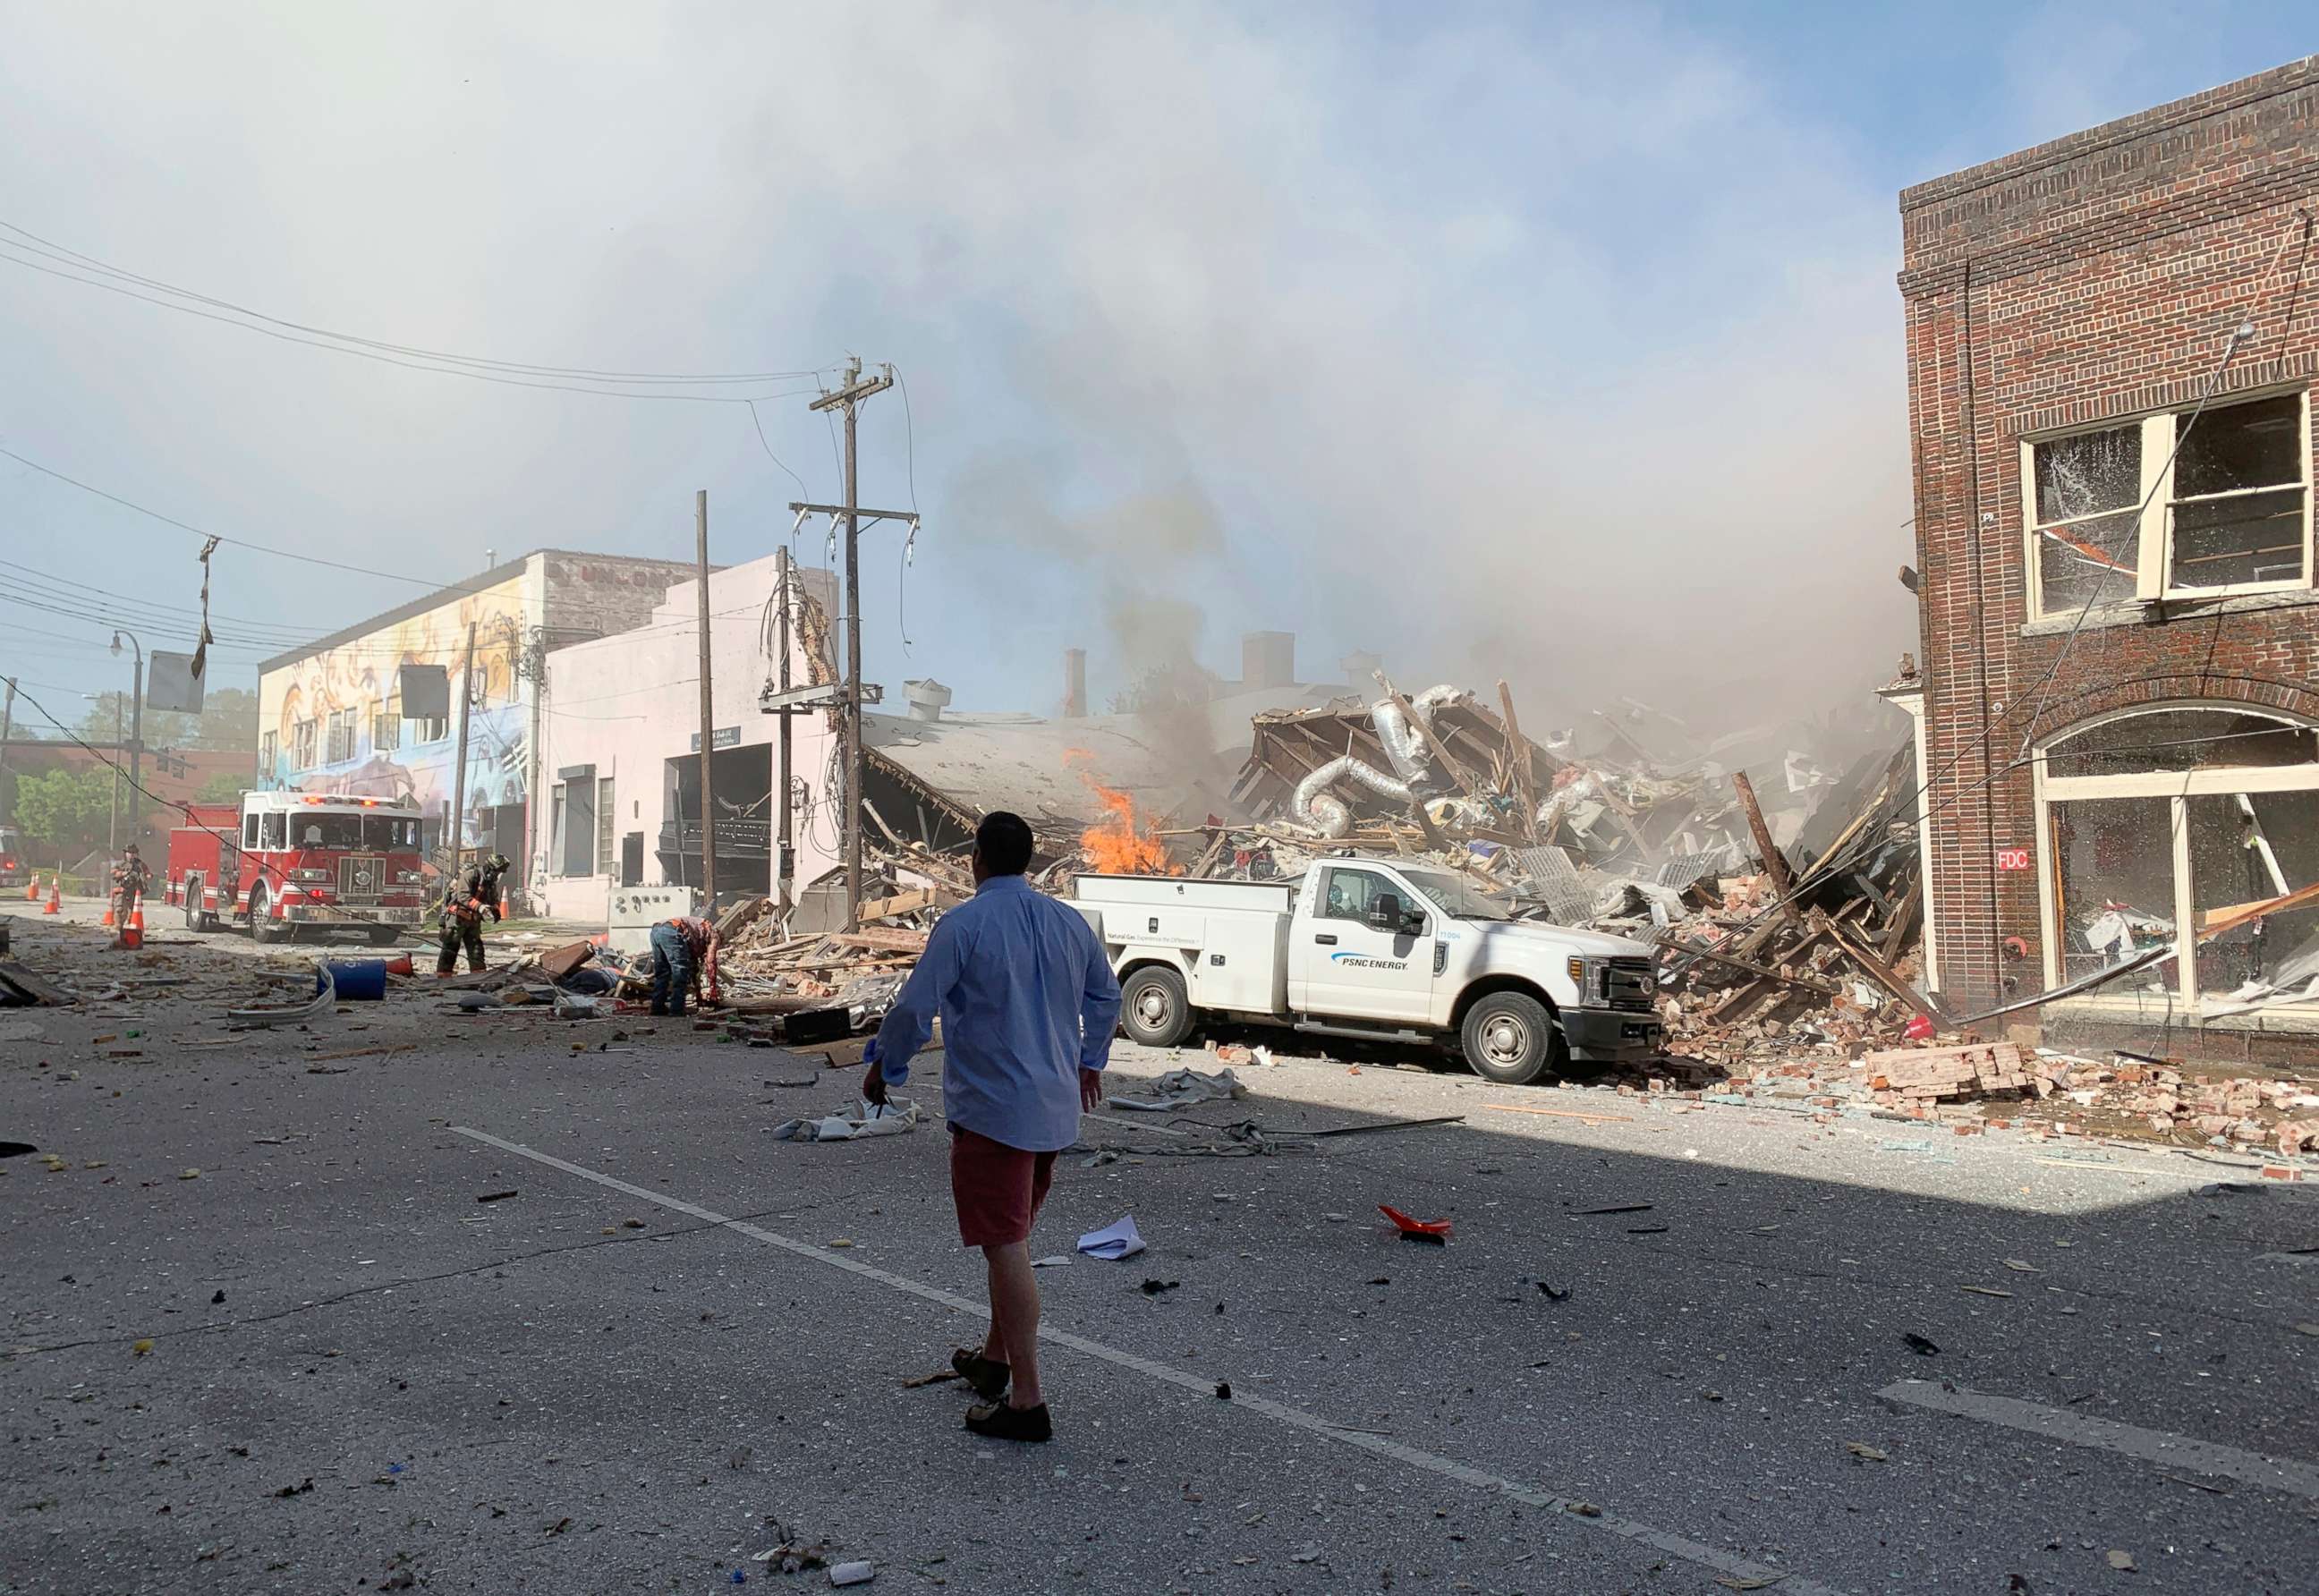 PHOTO: In this photo released by Jim Rogalski, firefighters help injured people after a building exploded, April 10, 2019, in Durham, N.C.